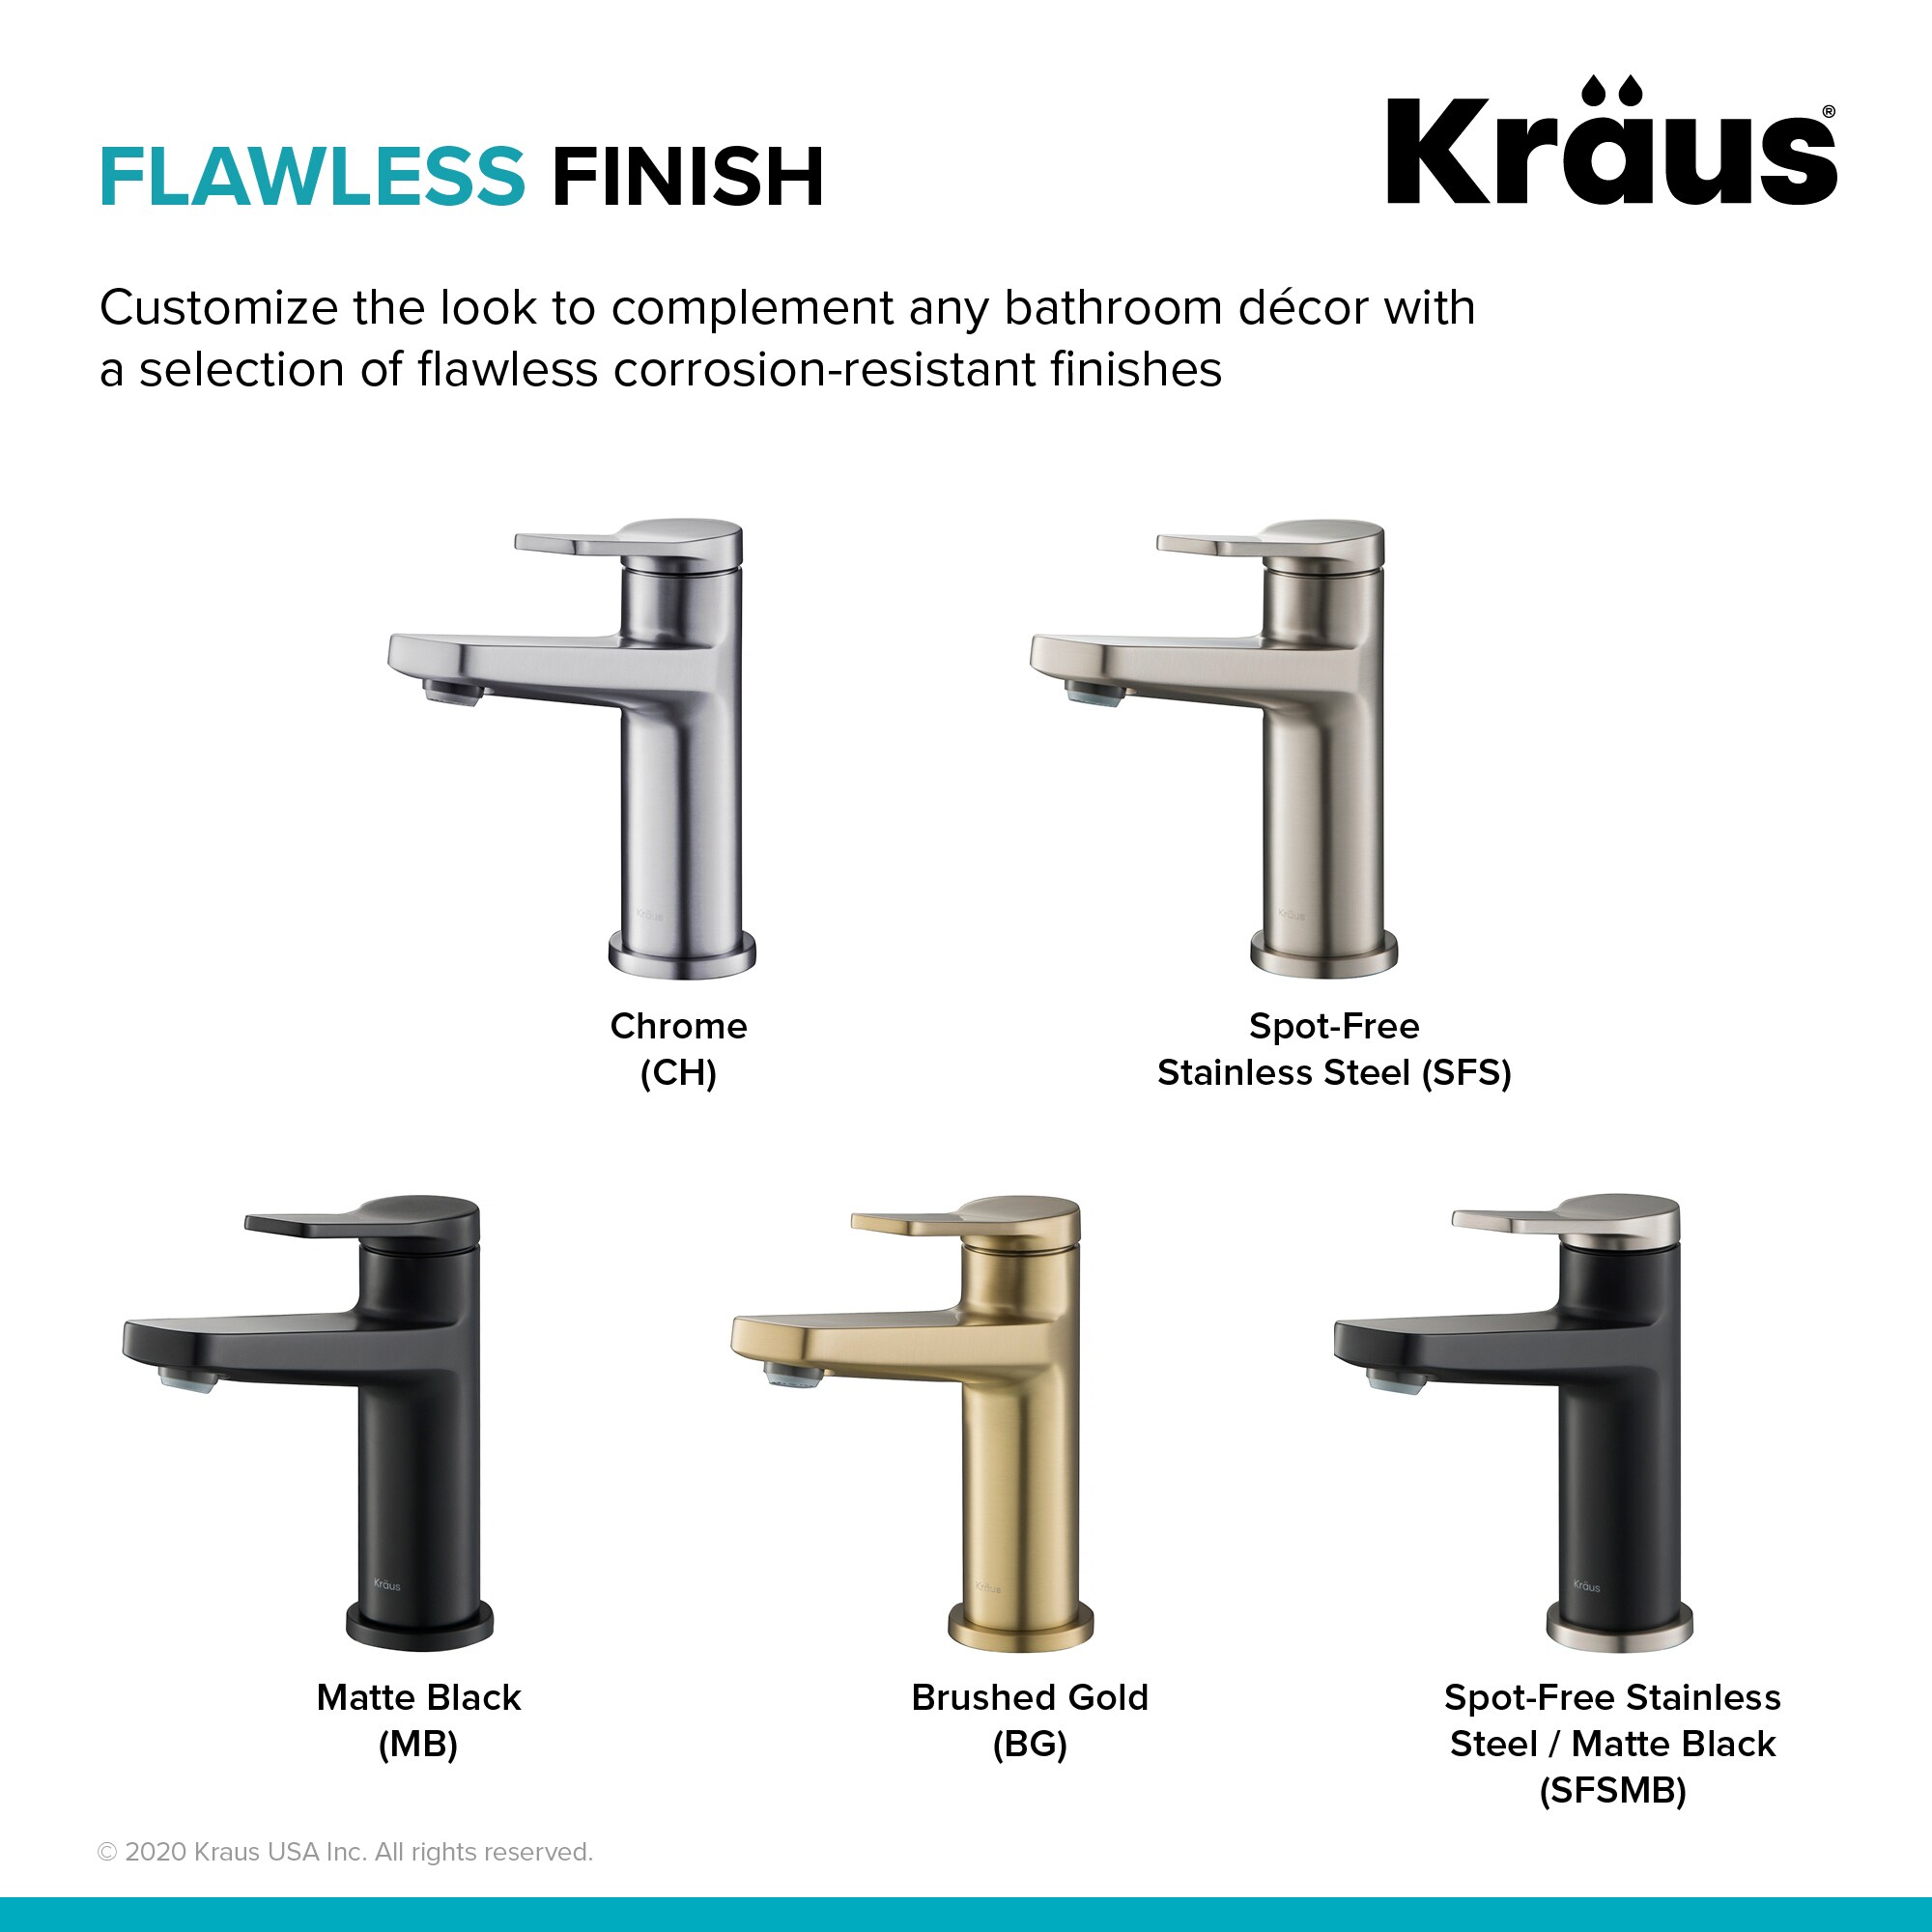 Kraus Indy Single Handle Bathroom Faucet with 24 Towel Bar Paper Holder Towel Ring and Robe Hook - Spot-Free Stainless Steel